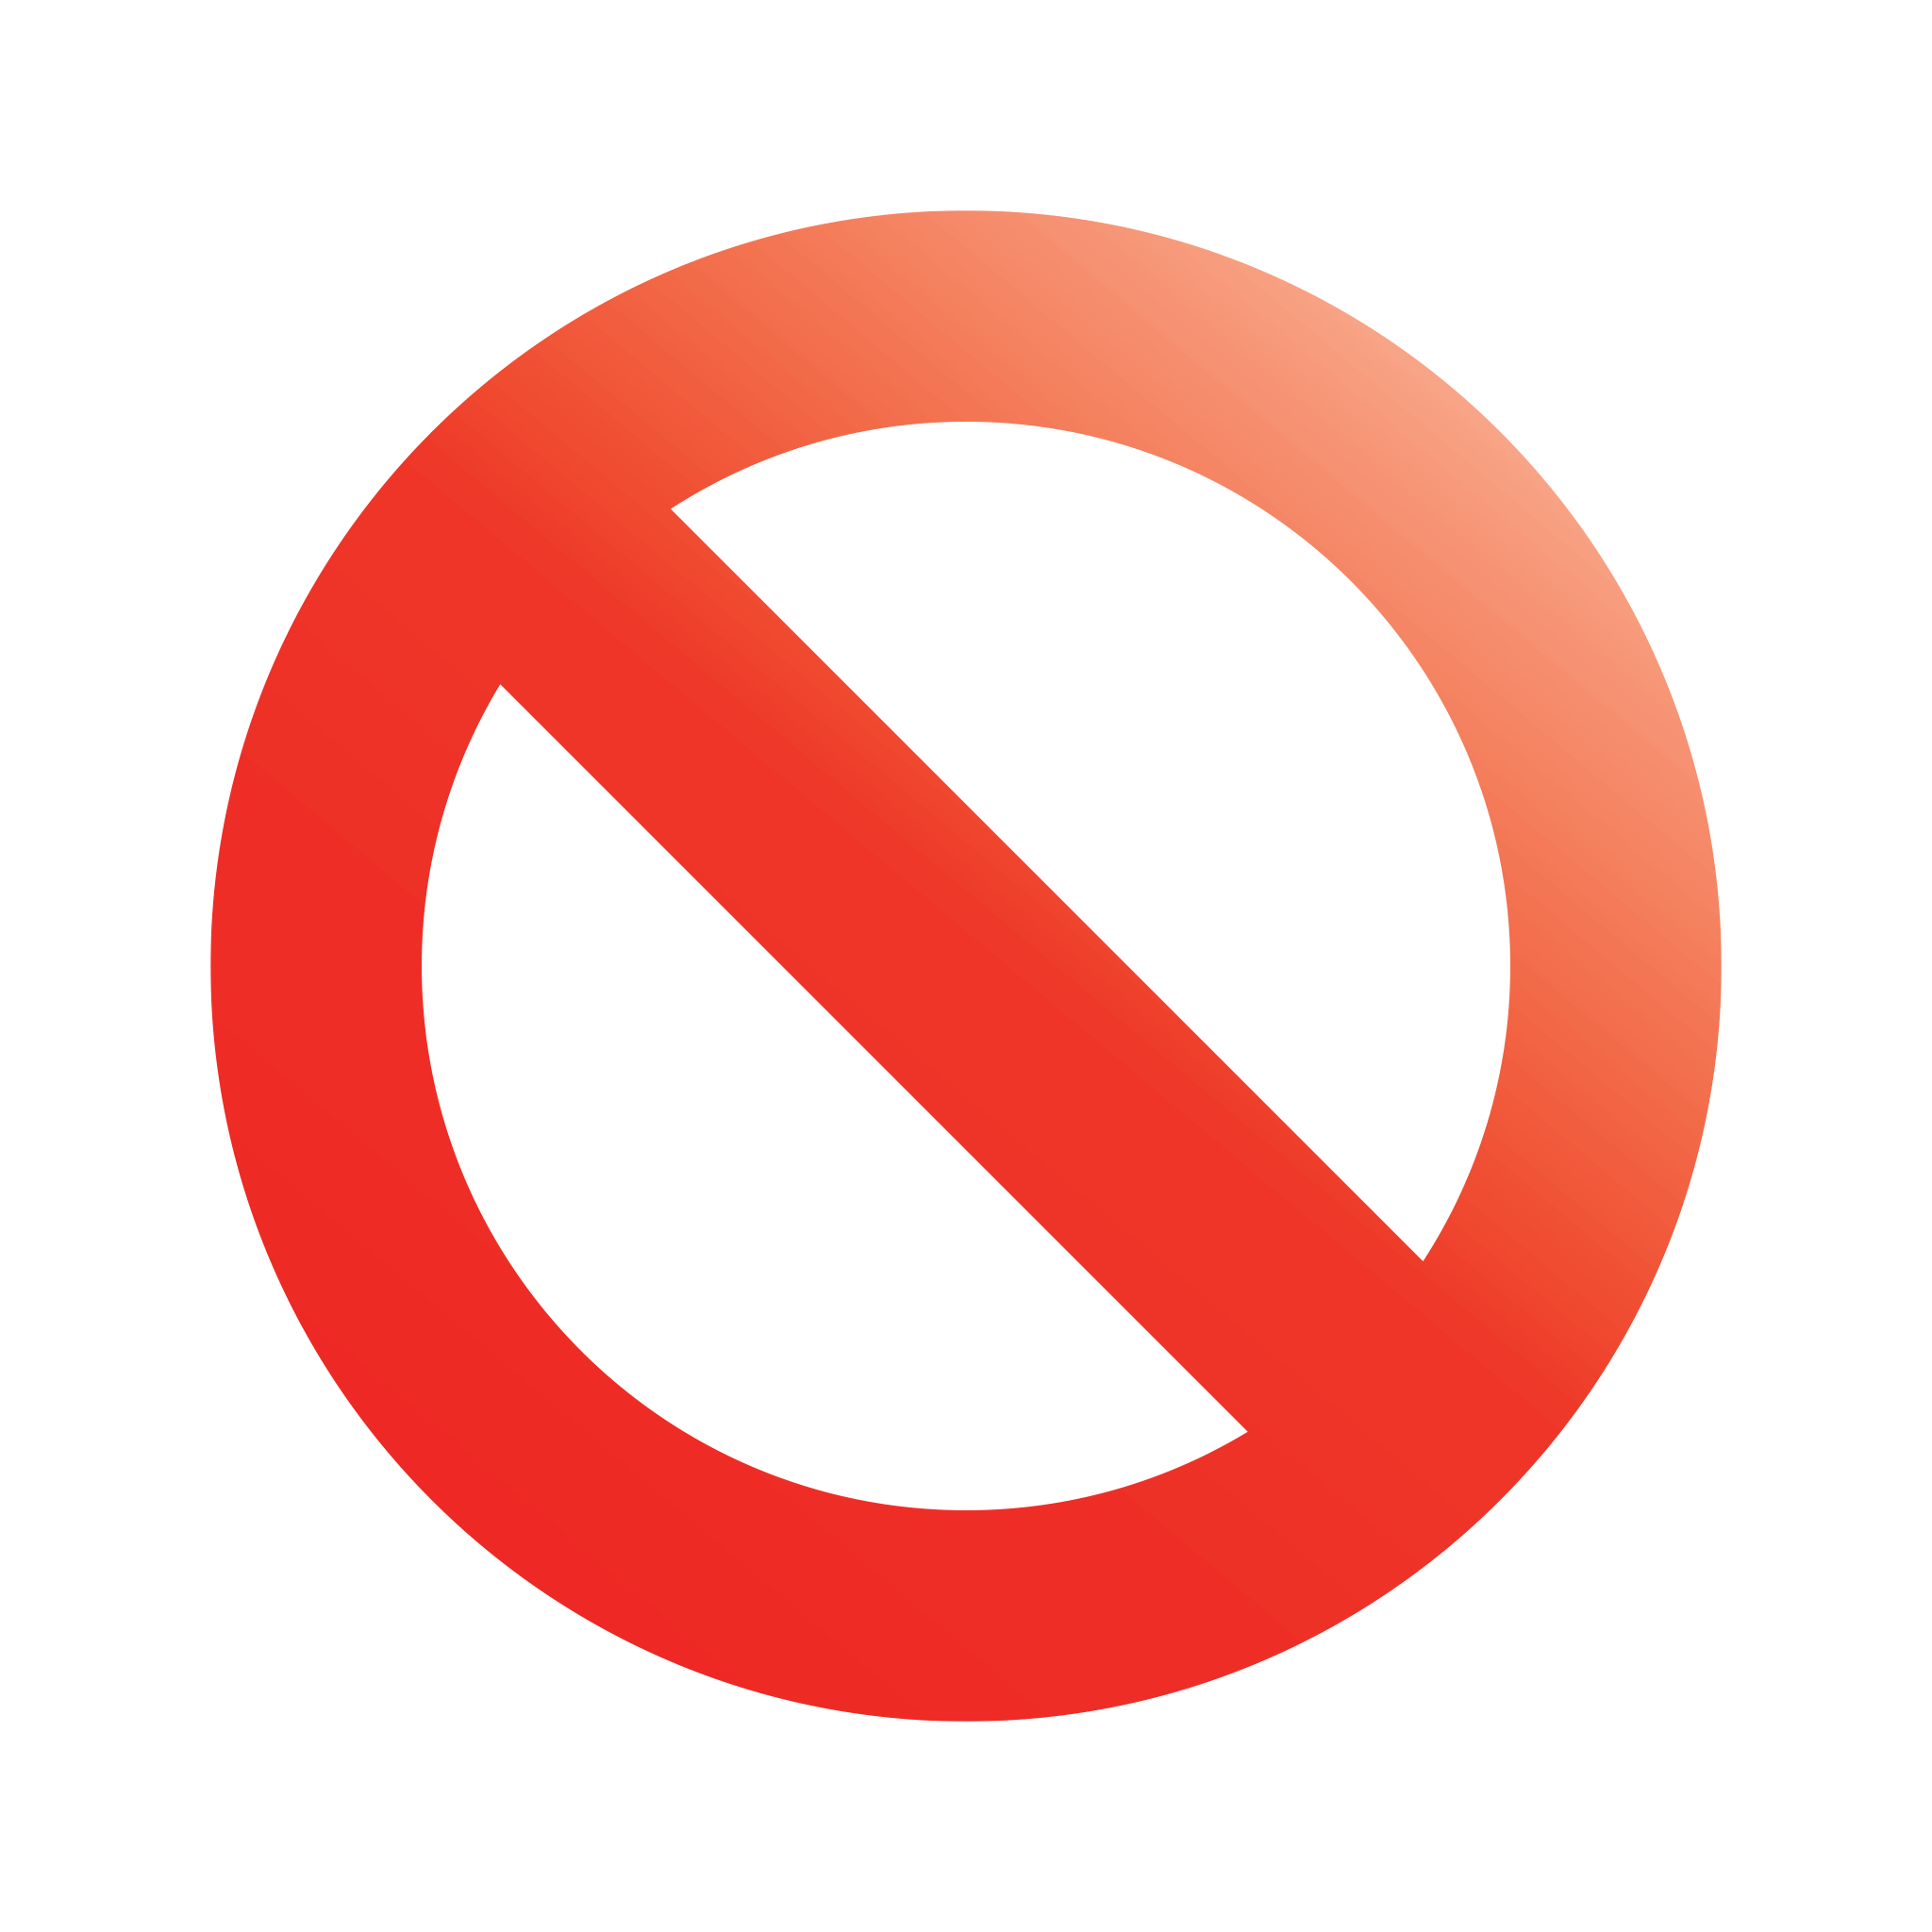 Stop Logo - Red Stop Icon PNG Image Free Download searchpng.com